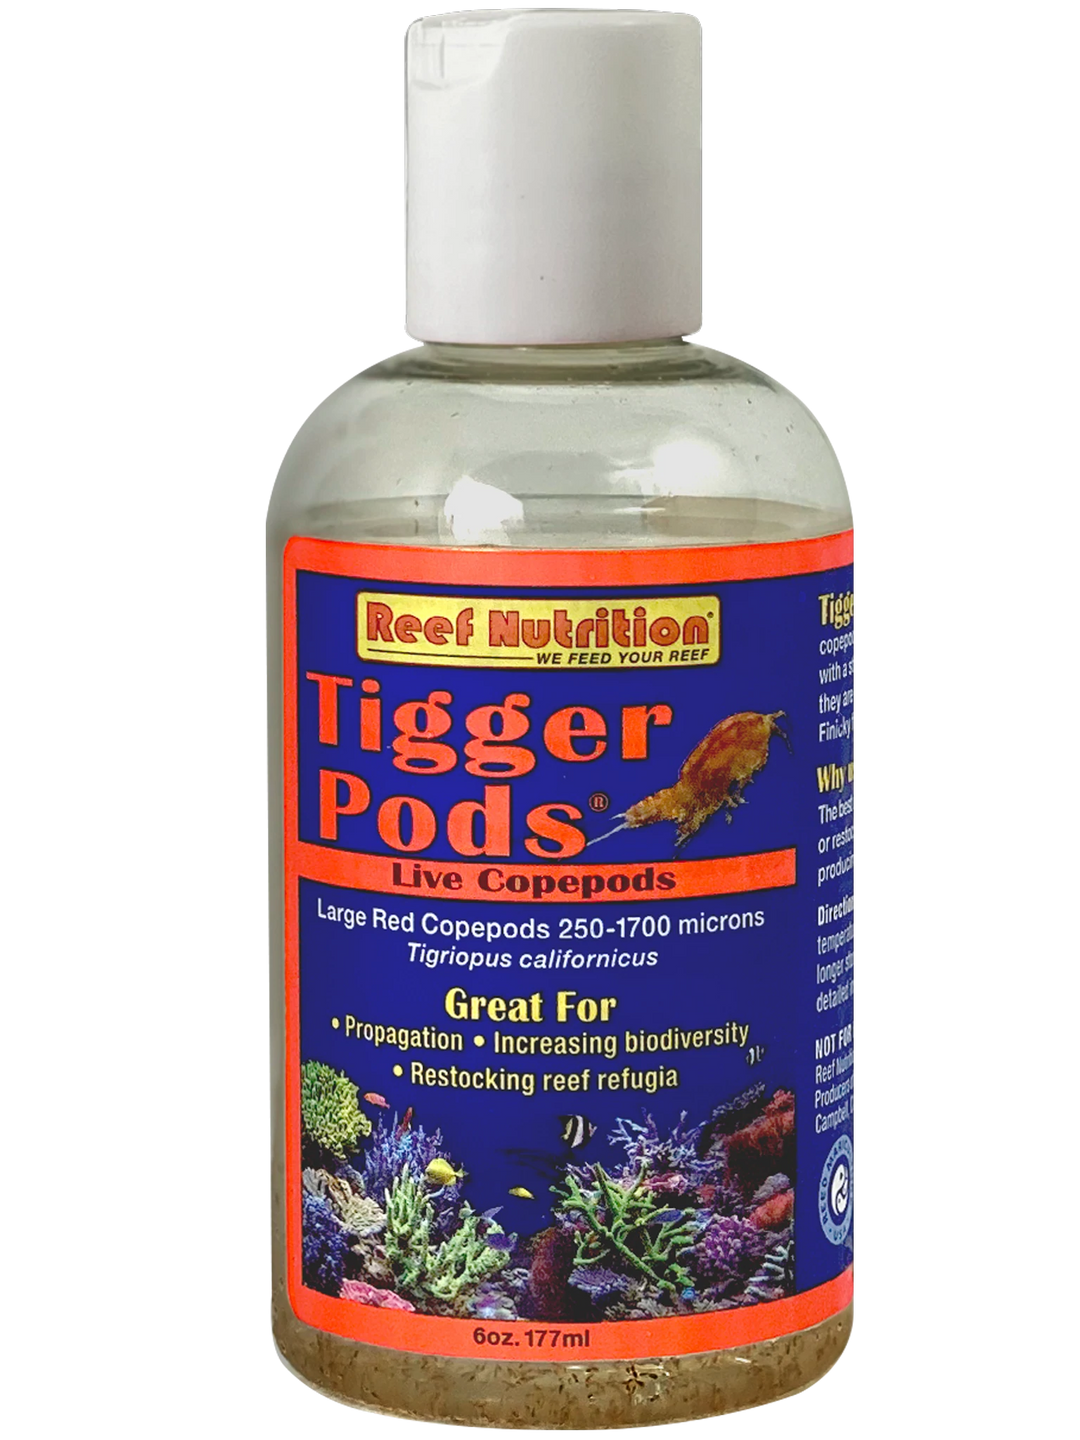 Reef Nutrition - Tigger Pods - 6oz - Live Copepods